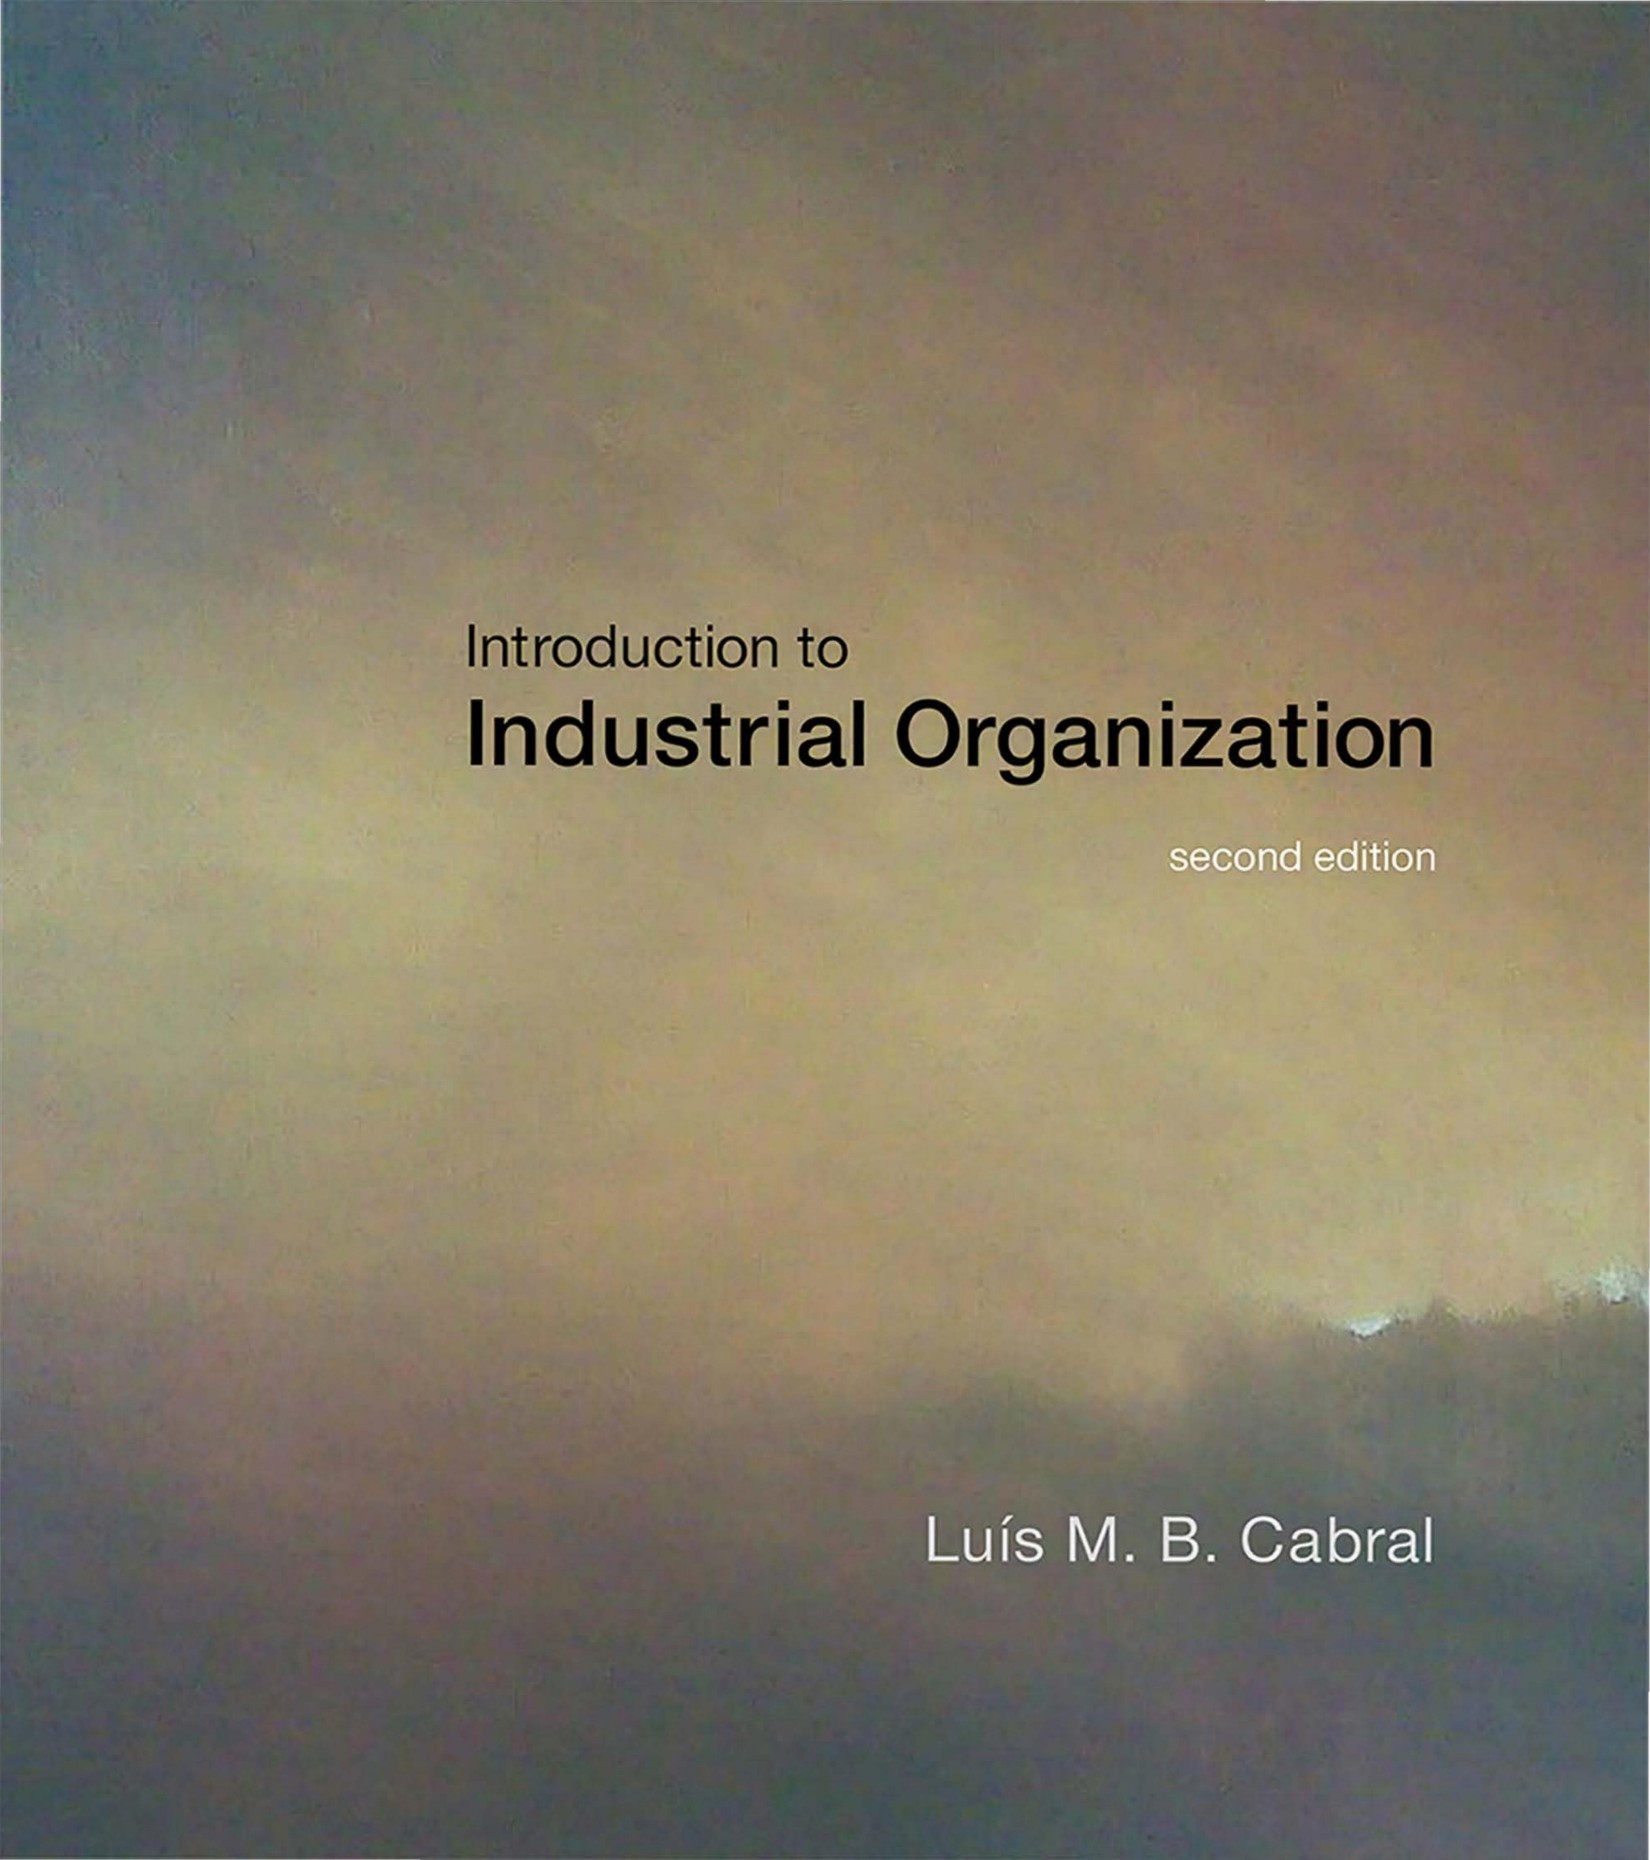 Introduction to Industrial Organization 2nd Edition by Luis M. B. Cabral.jpg